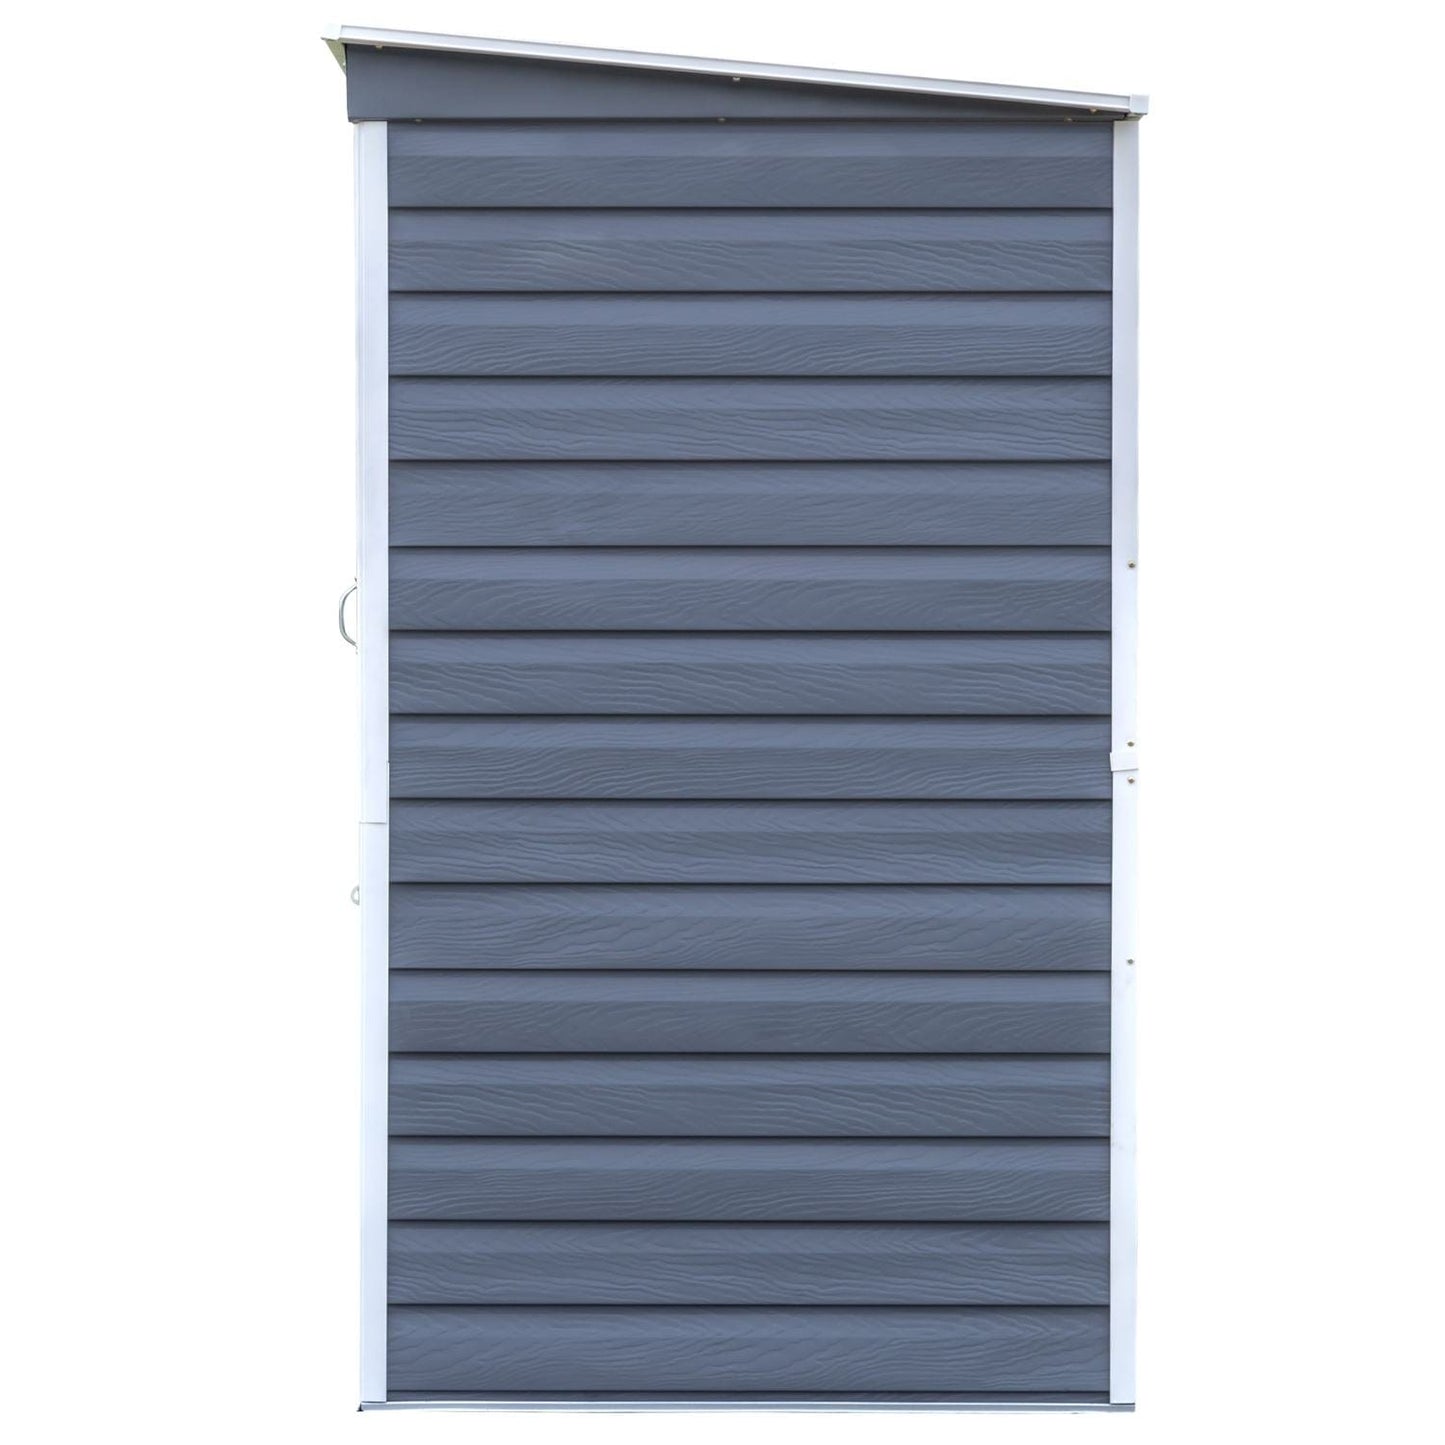 Arrow Shed-in-a-Box Steel Storage Shed 6' x 4' Galvanized Charcoal/Cream - mygreenhousestore.com